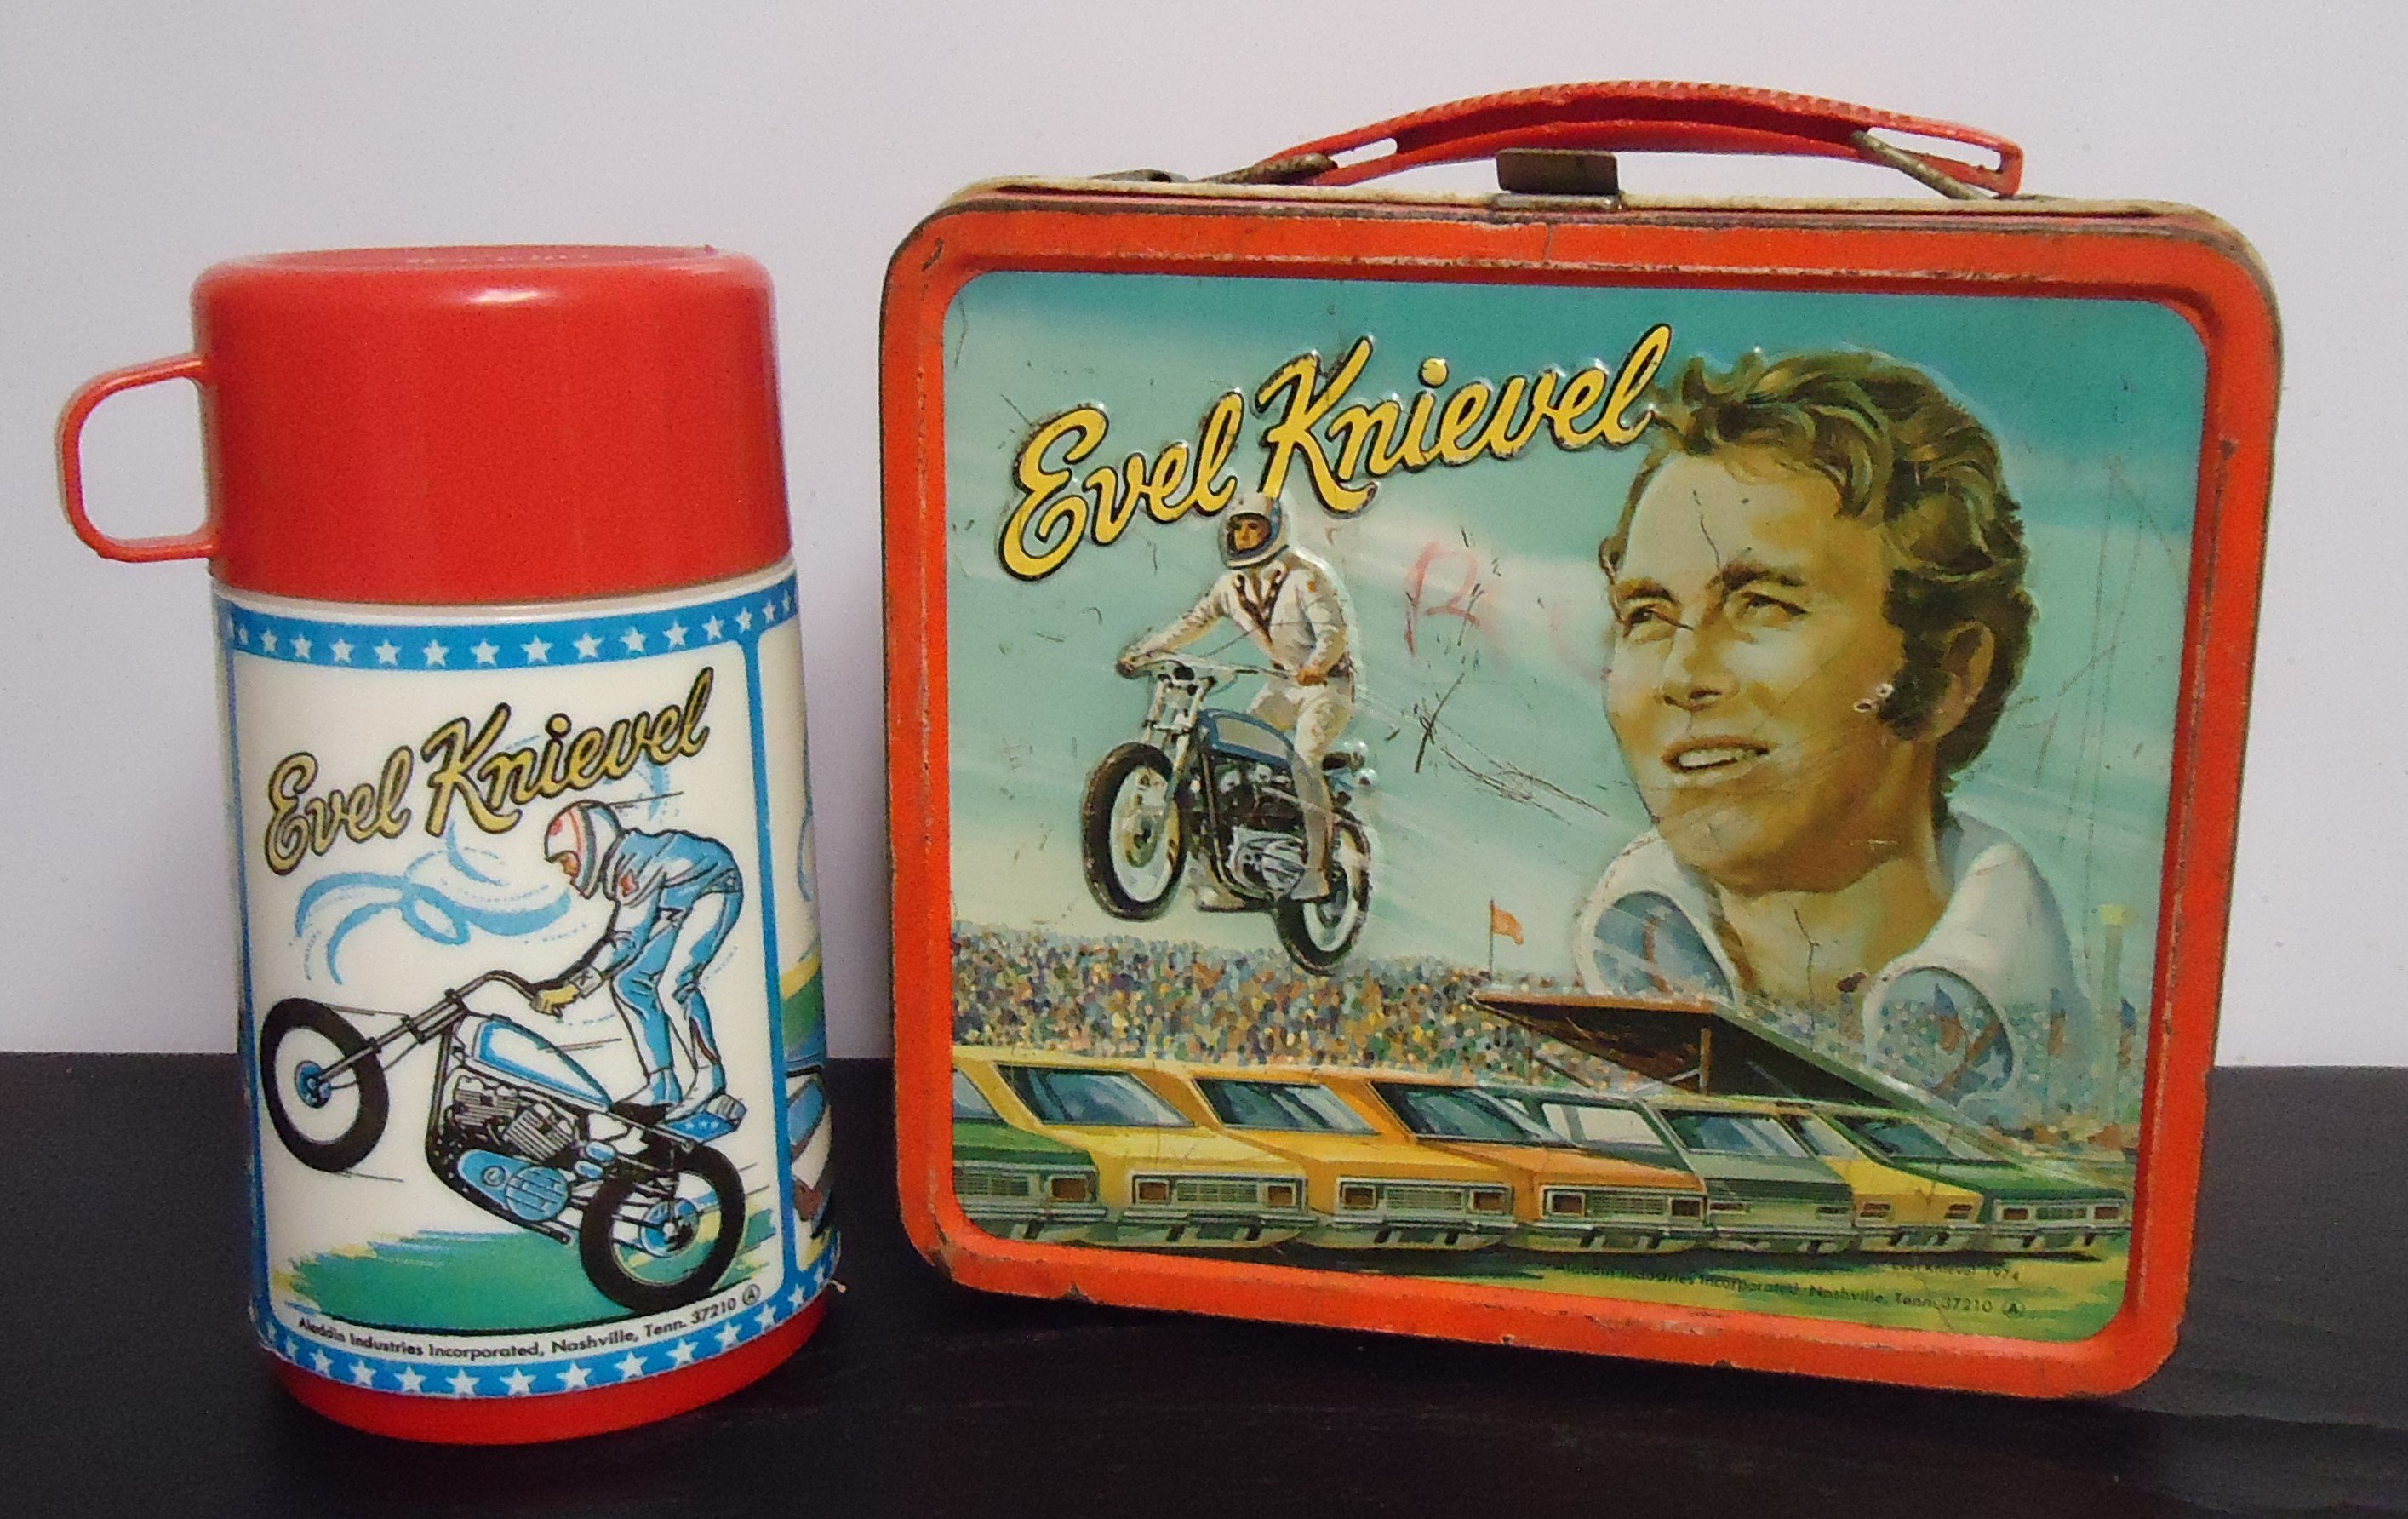 (13) Metal Lunch Box W/ Thermos
"Evel Knievel"
$200.00